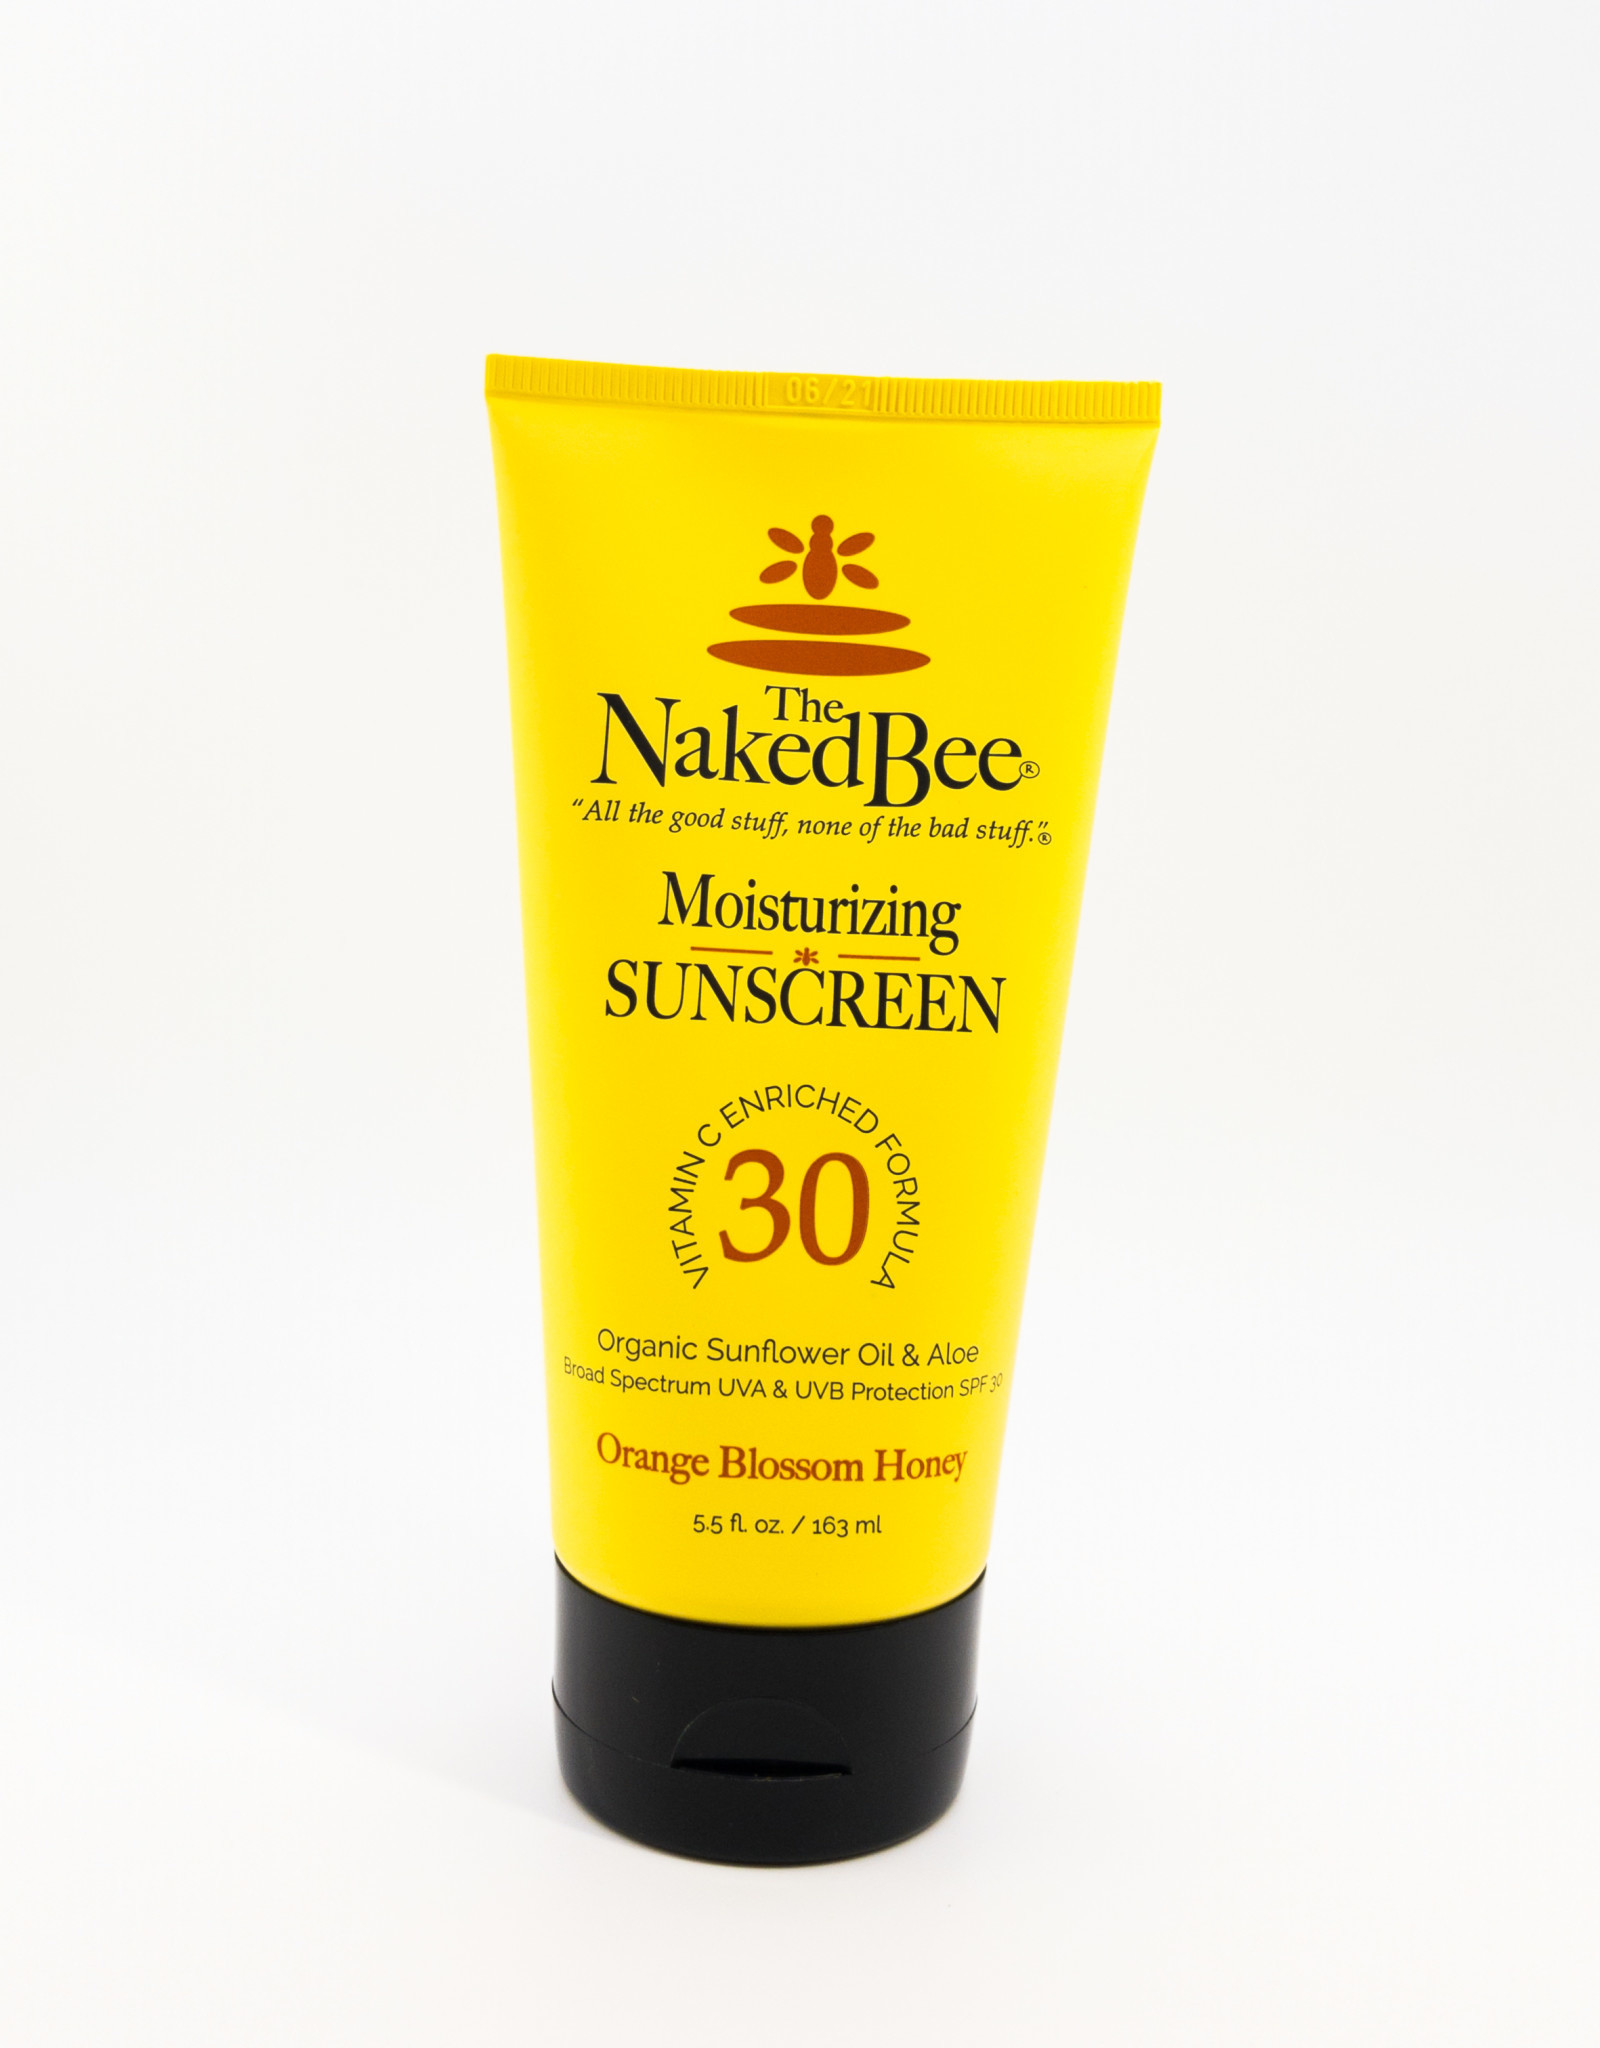 The Naked Bee The Naked Bee - Moisturizing Sunscreen in Orange Blossom Honey with SPF 30, 5.5 oz.